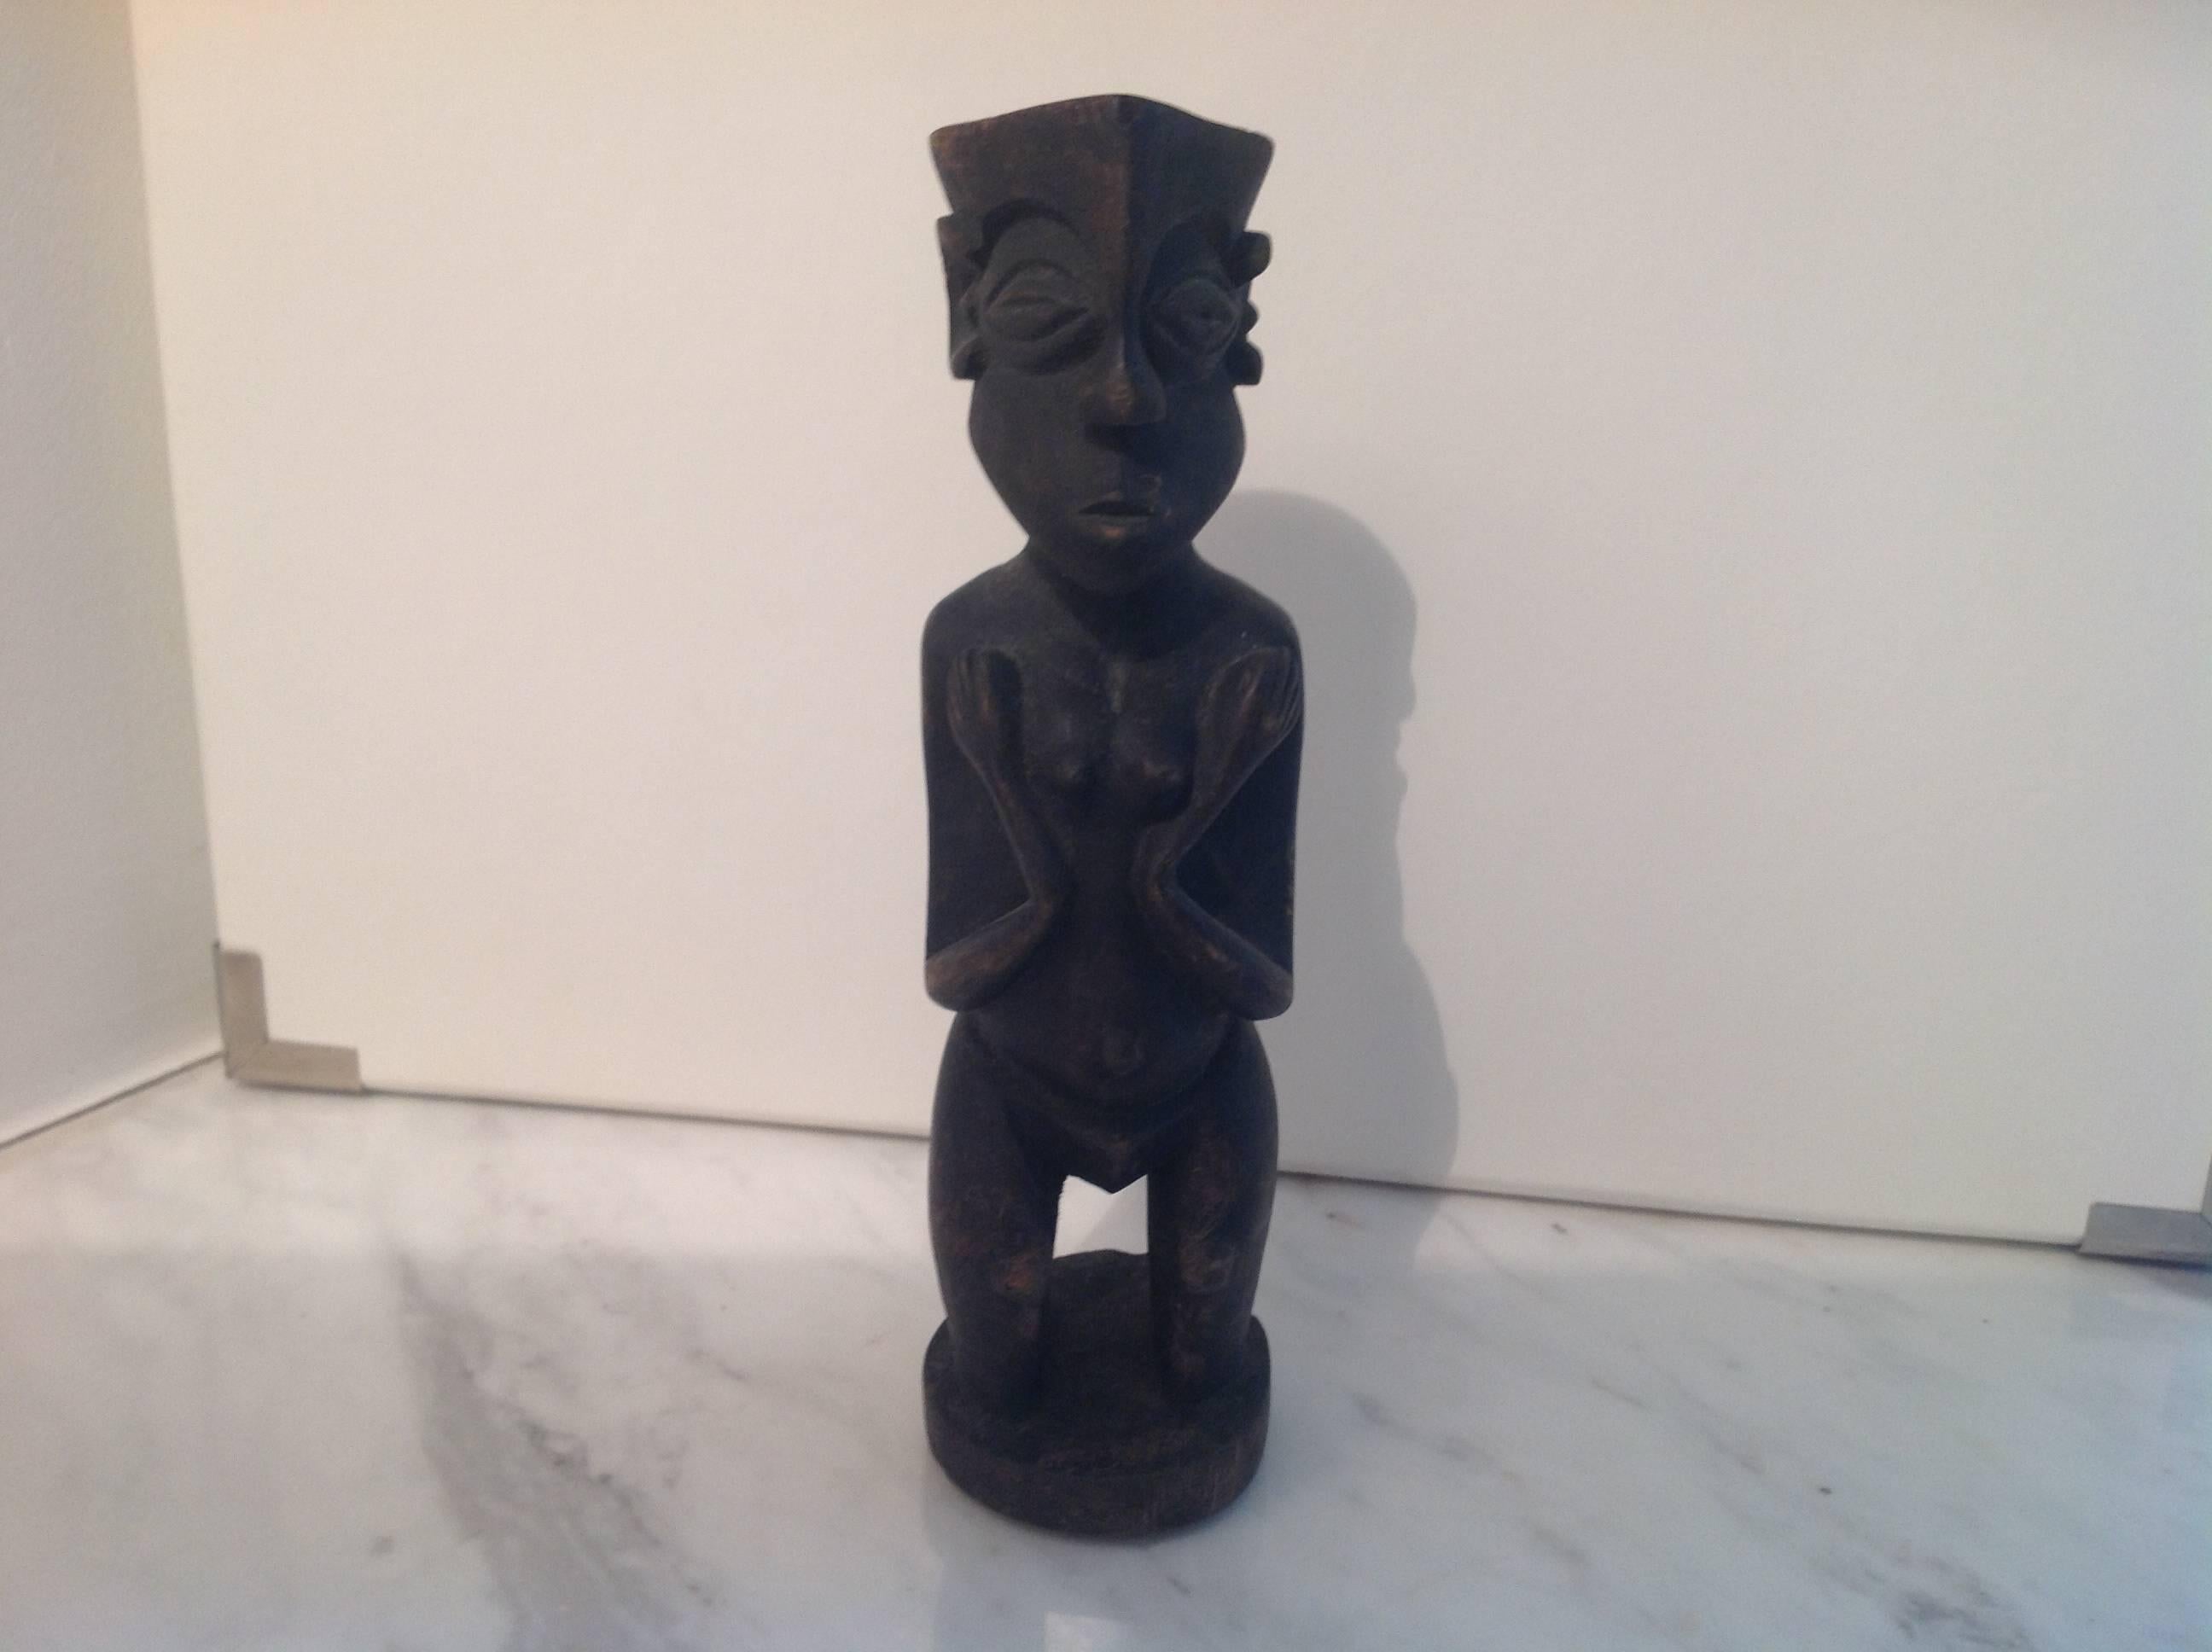 Carved wood figure purchased at market in Mali, West Africa. Scooped top for use of  incense or to hold a treasured possession including tobacco's etc. Uncertain of the tribe this piece descends from but it is heavily yet gently worn and soft to the